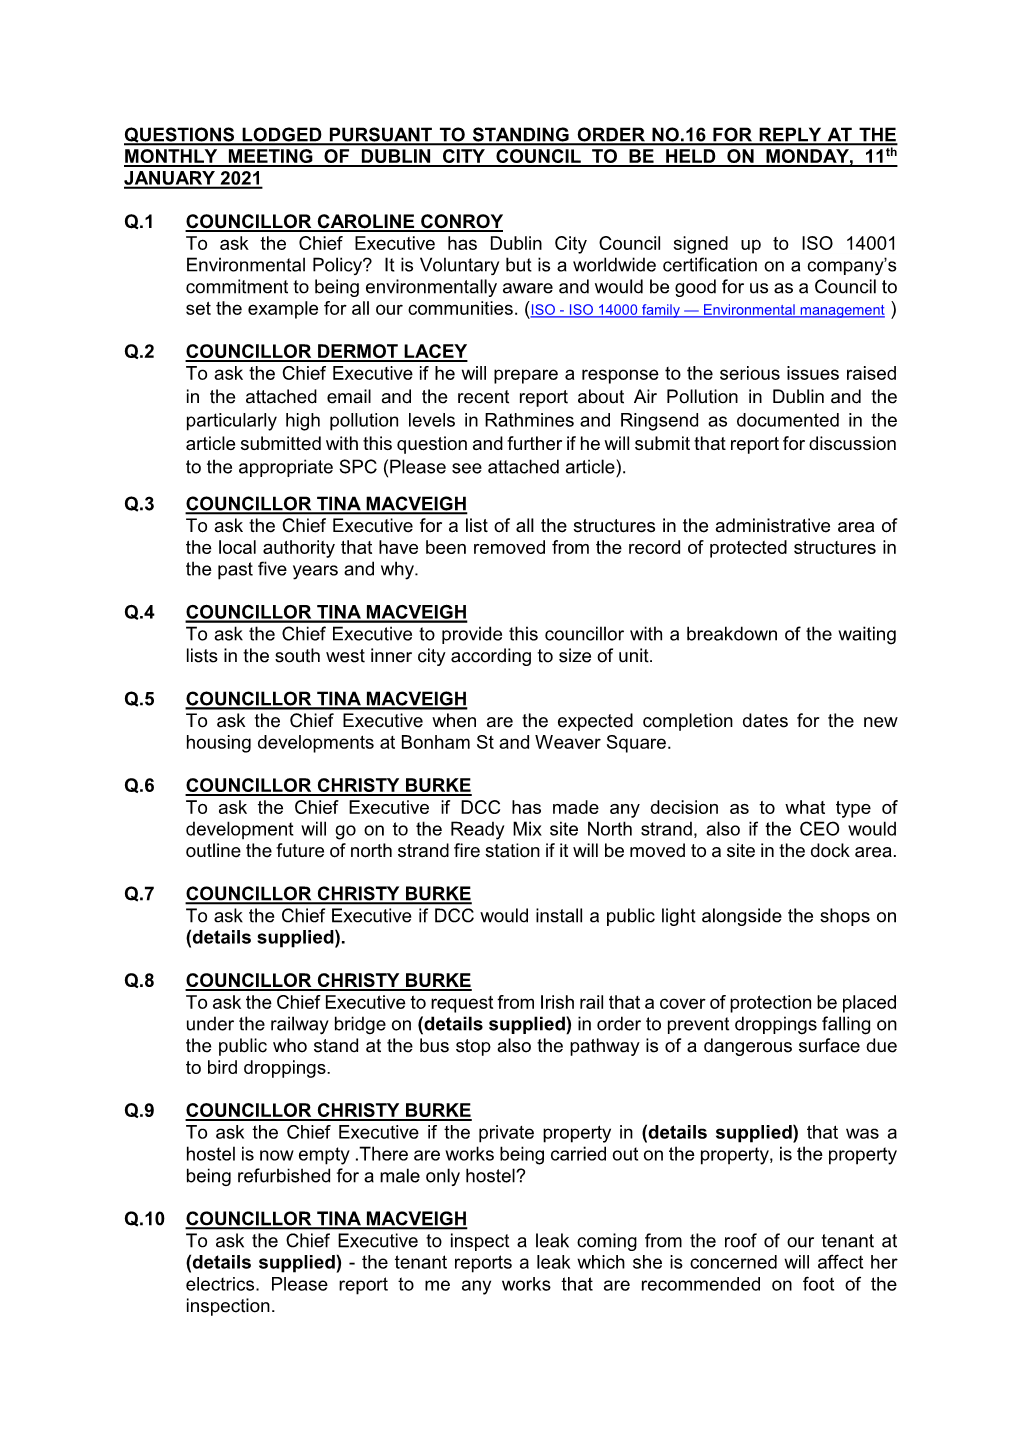 QUESTIONS LODGED PURSUANT to STANDING ORDER NO.16 for REPLY at the MONTHLY MEETING of DUBLIN CITY COUNCIL to BE HELD on MONDAY, 11Th JANUARY 2021